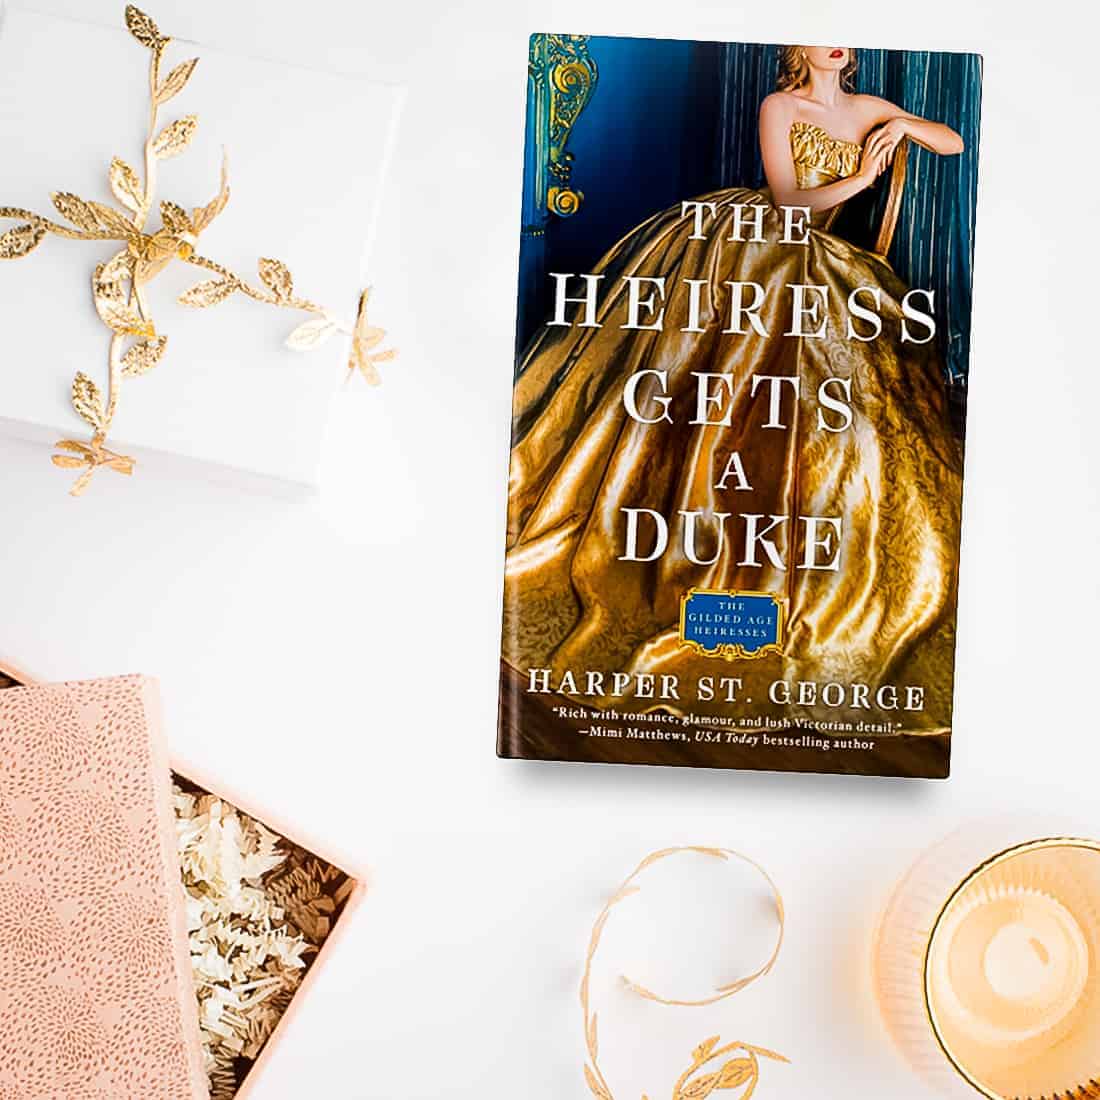 The Heiress Gets a Duke by Harper St. George – Gilded Age Heiresses Book 1